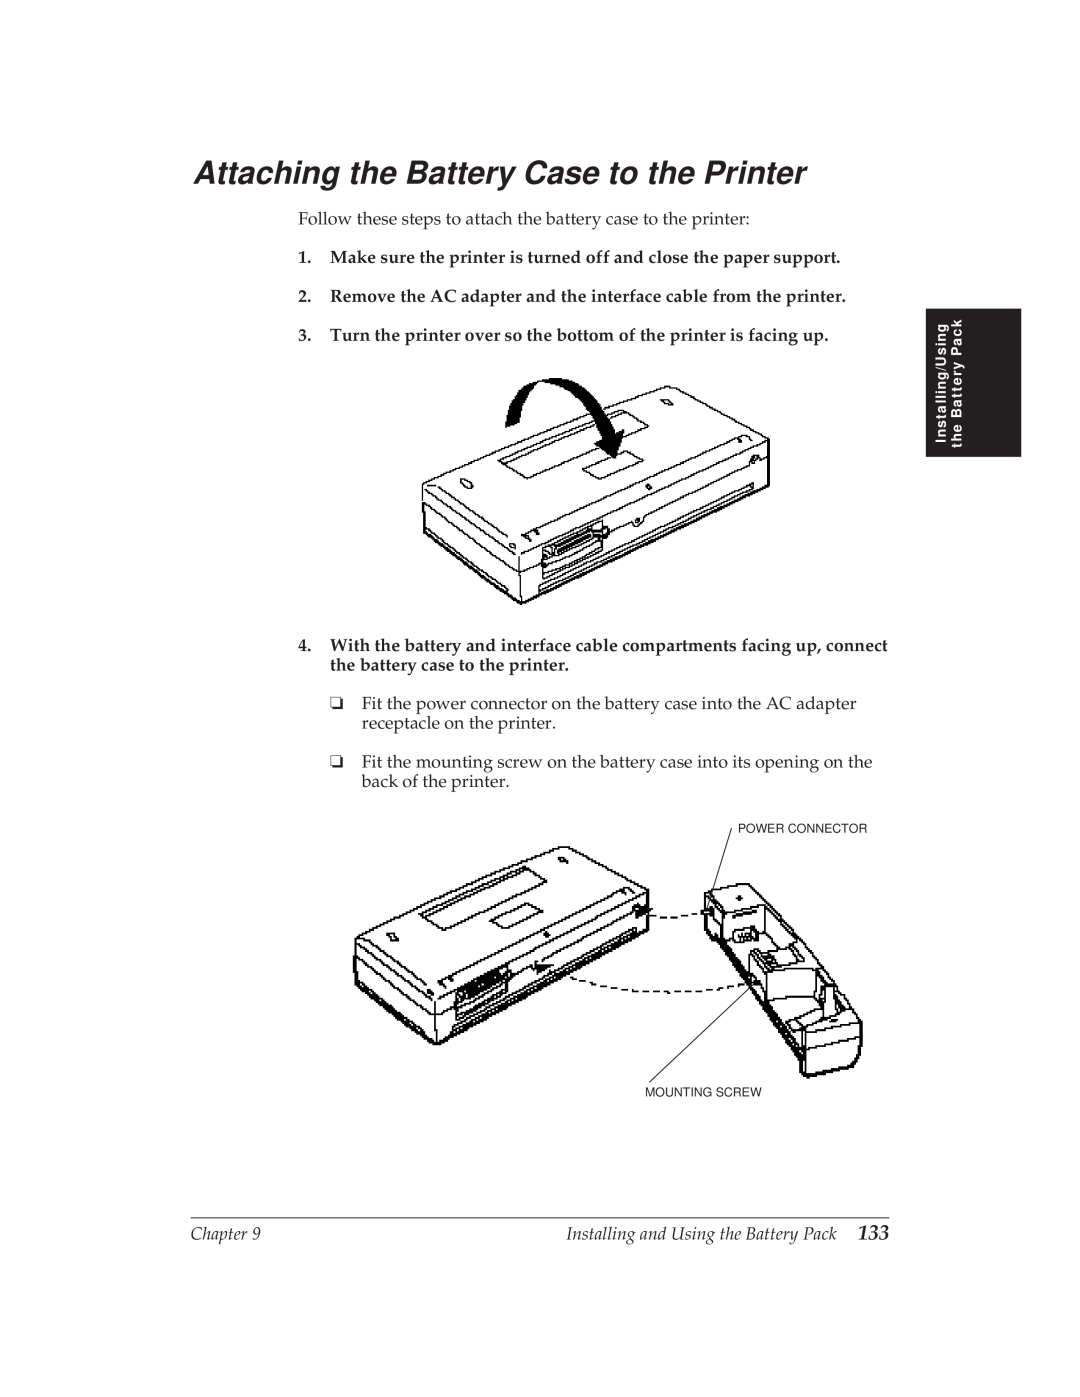 Canon BJ-30 Attaching the Battery Case to the Printer, Make sure the printer is turned off and close the paper support 